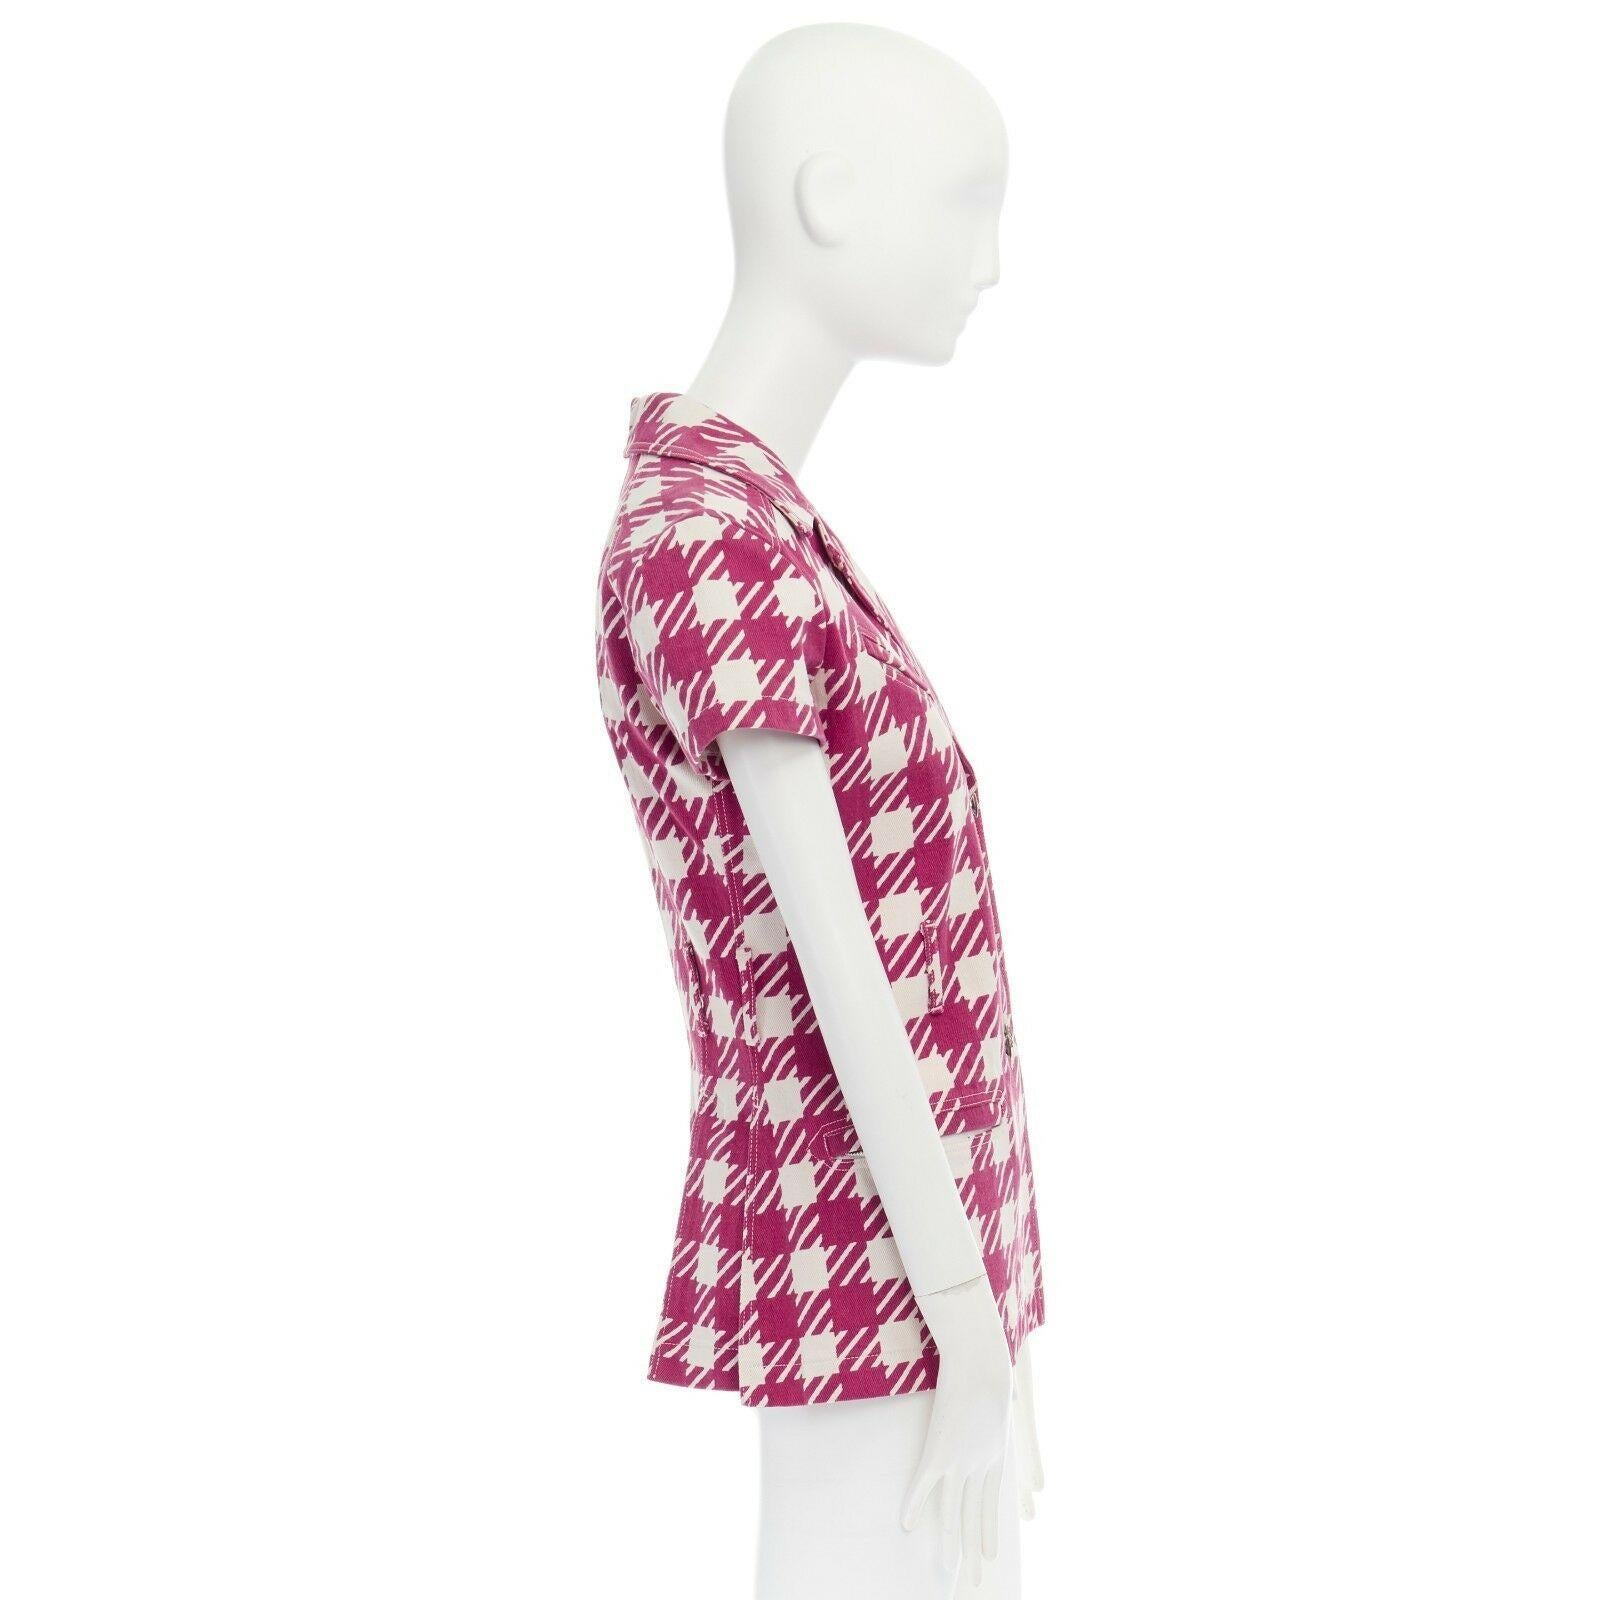 Beige ALAIA Vintage SS91 Tati red white checked denim fitted jacket M FR38 IT42 US6